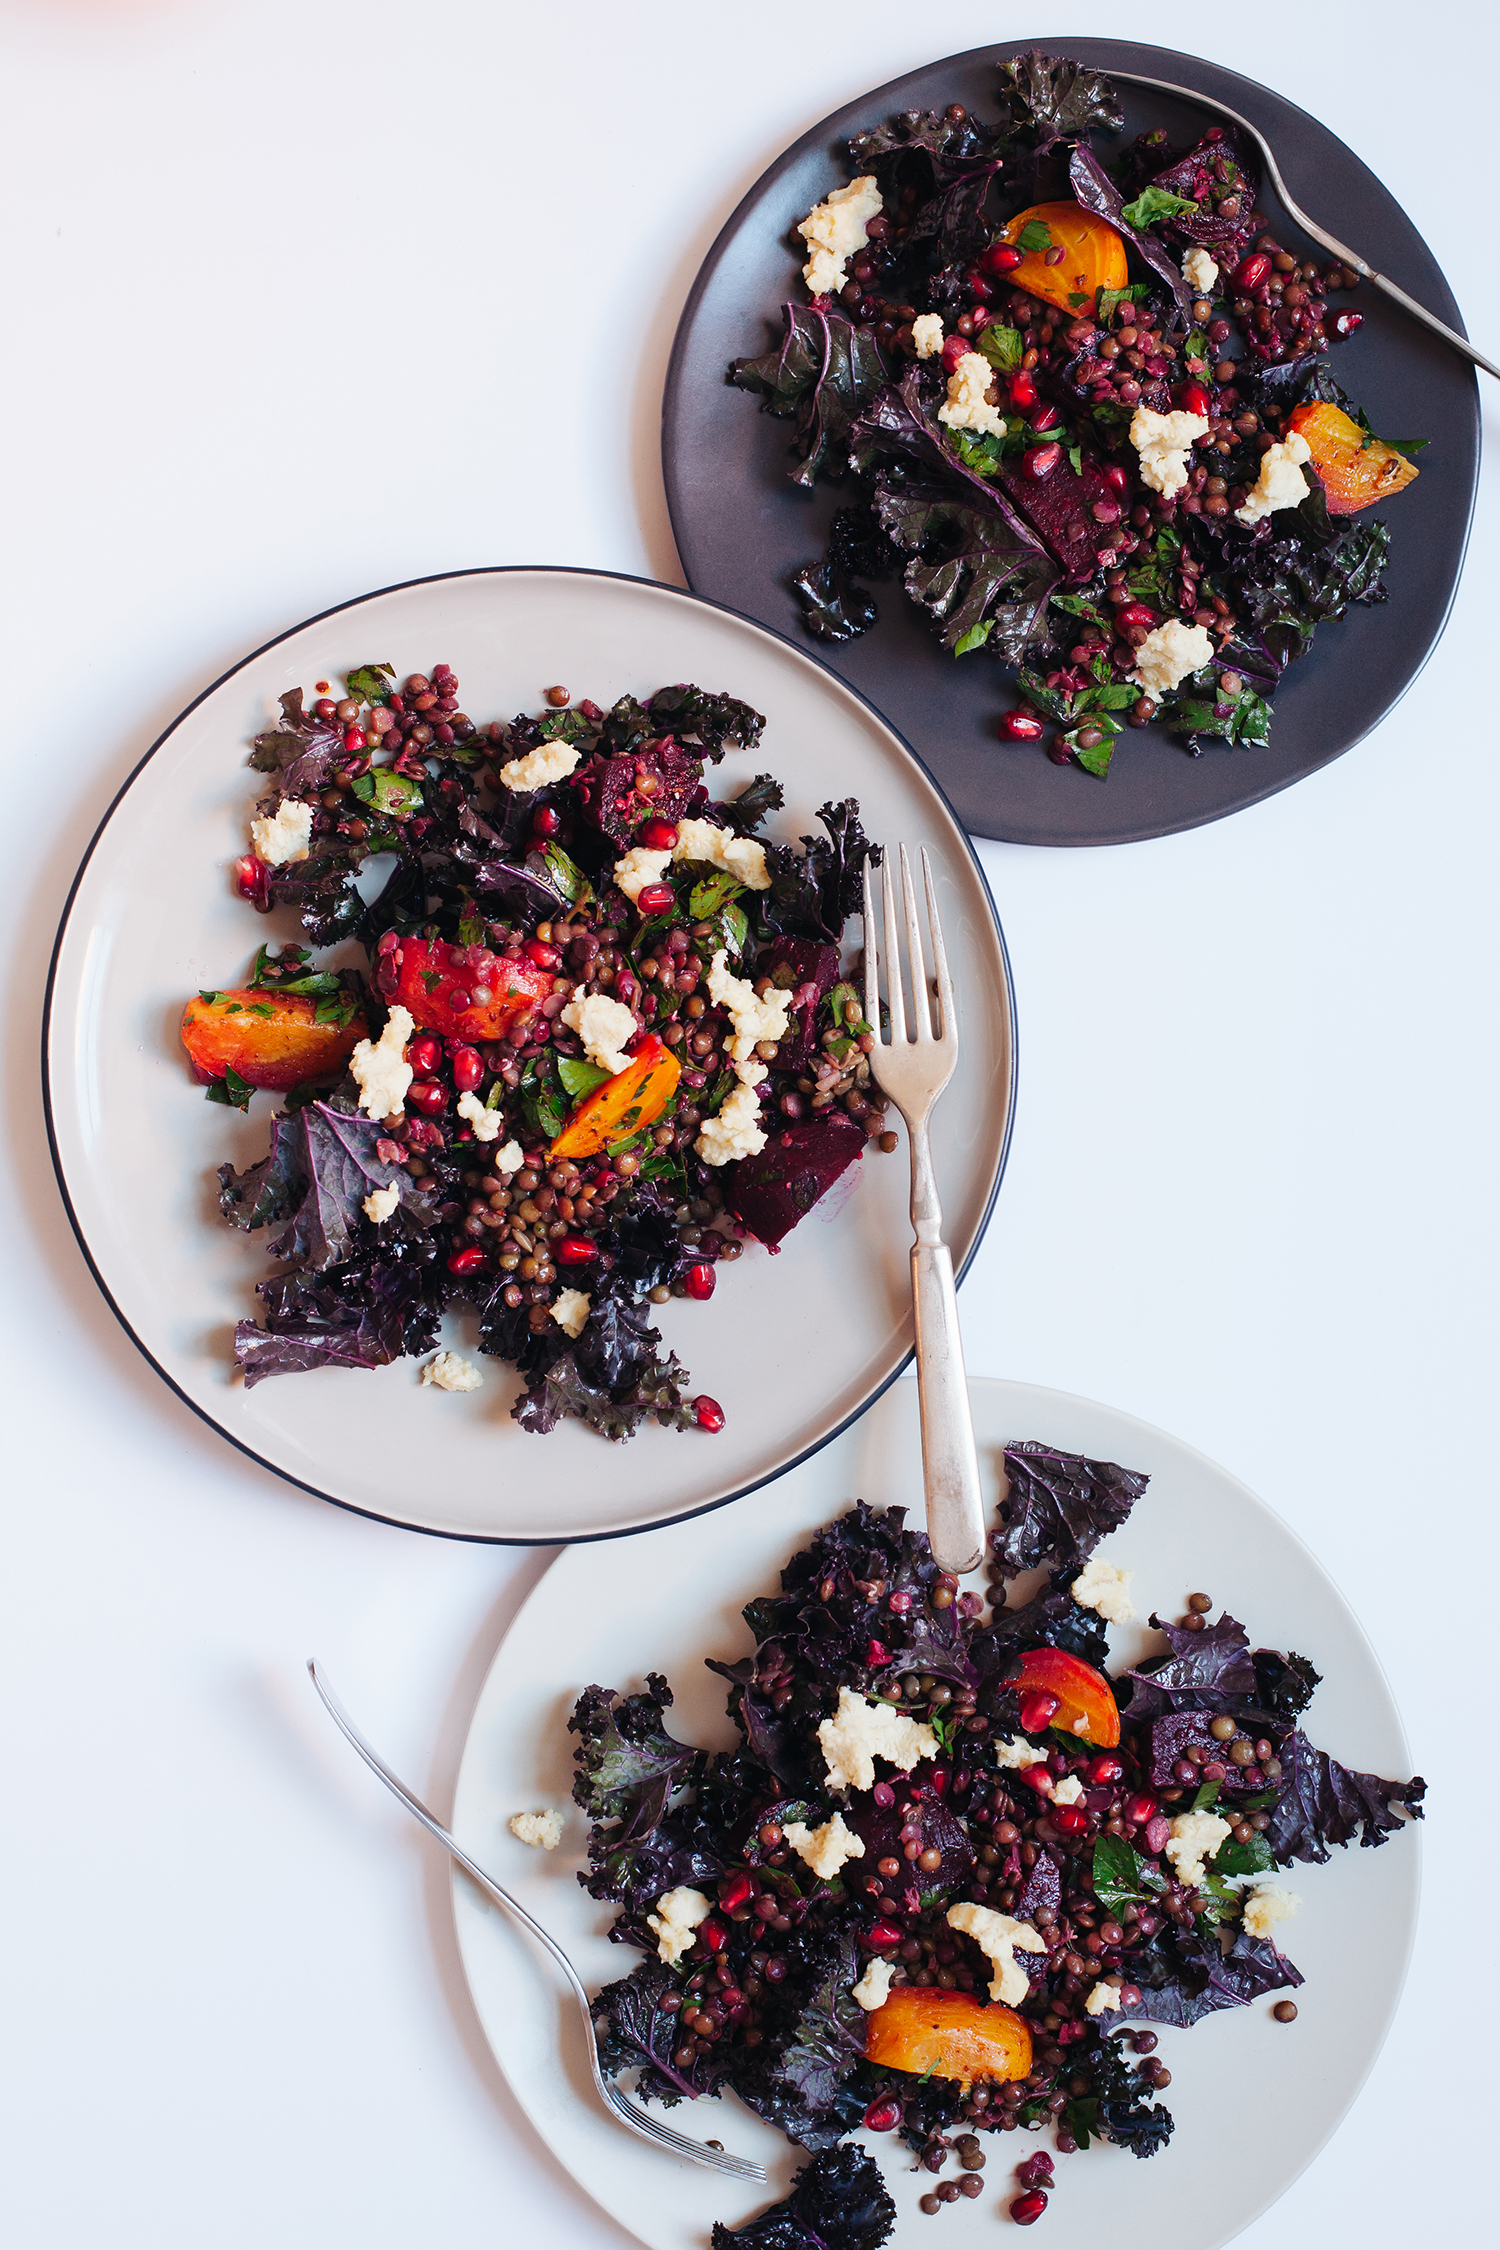 Kale Salad with Marinated Beets, Lentils and Almond Cheese | Golubka Kitchen